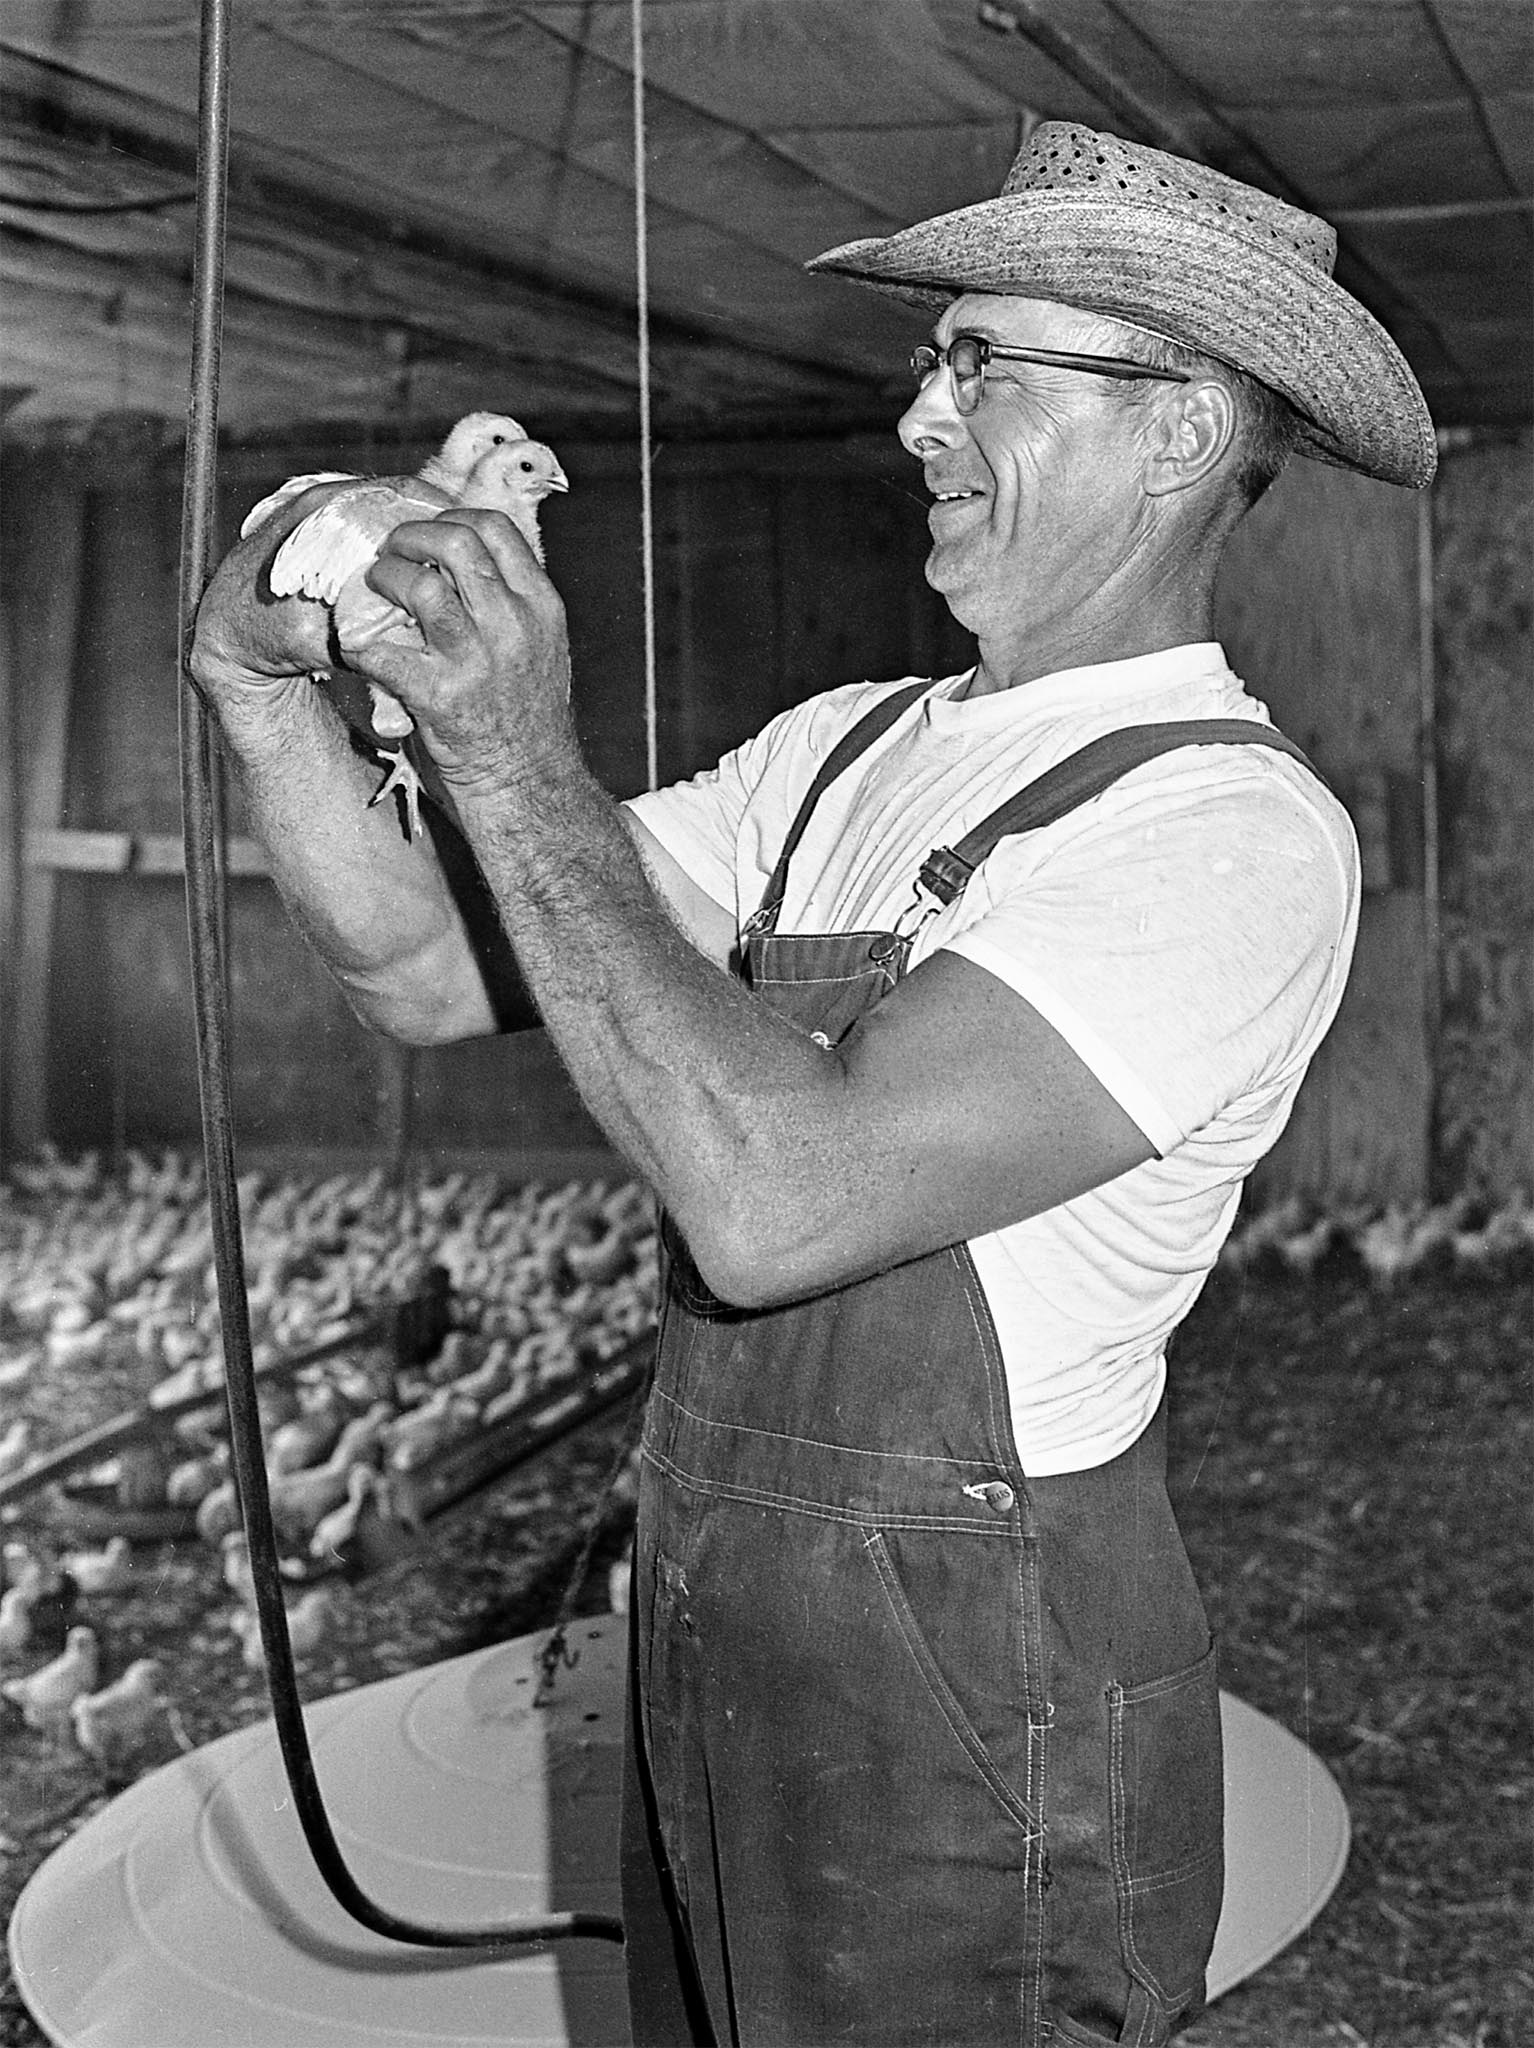 This photo was published in a 1977 issue of Oklahoma Farm Bureau Farmer in a feature story about Jim Martin, a broiler grower from Stilwell and an Adair County Farm Bureau Board member who produced between 90,000 and 100,000 chickens annually. Martin spoke about the benefits of joining an organization designed to help growers increase their profit margins. In addition, Martin described the life of a broiler grower and the constant care that was necessary to properly care for poultry.